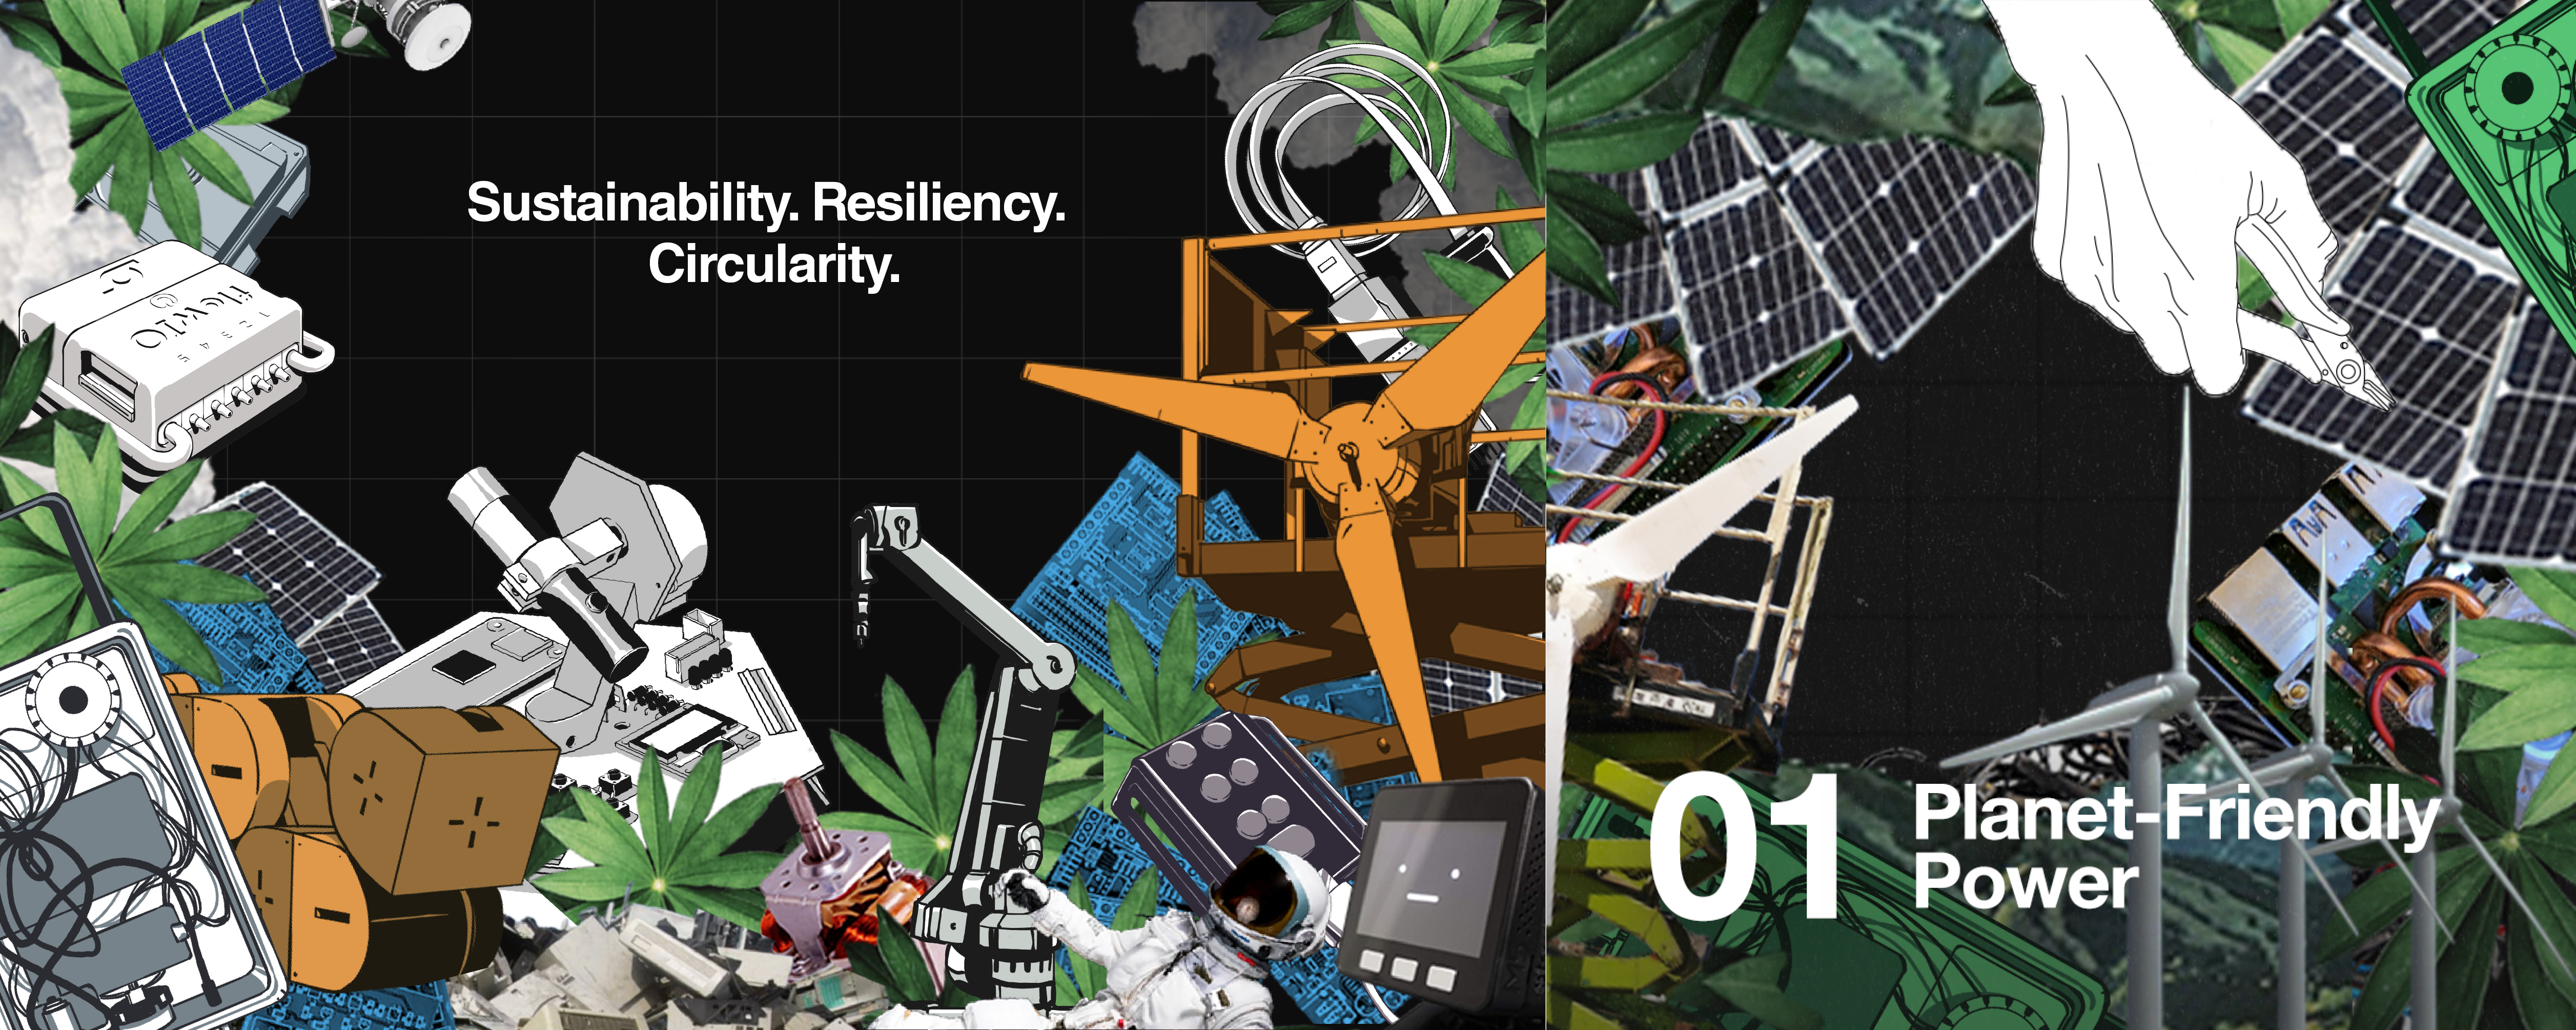 2022 Hackaday Prize: Congratulations to the Planet-Friendly Power Finalists!